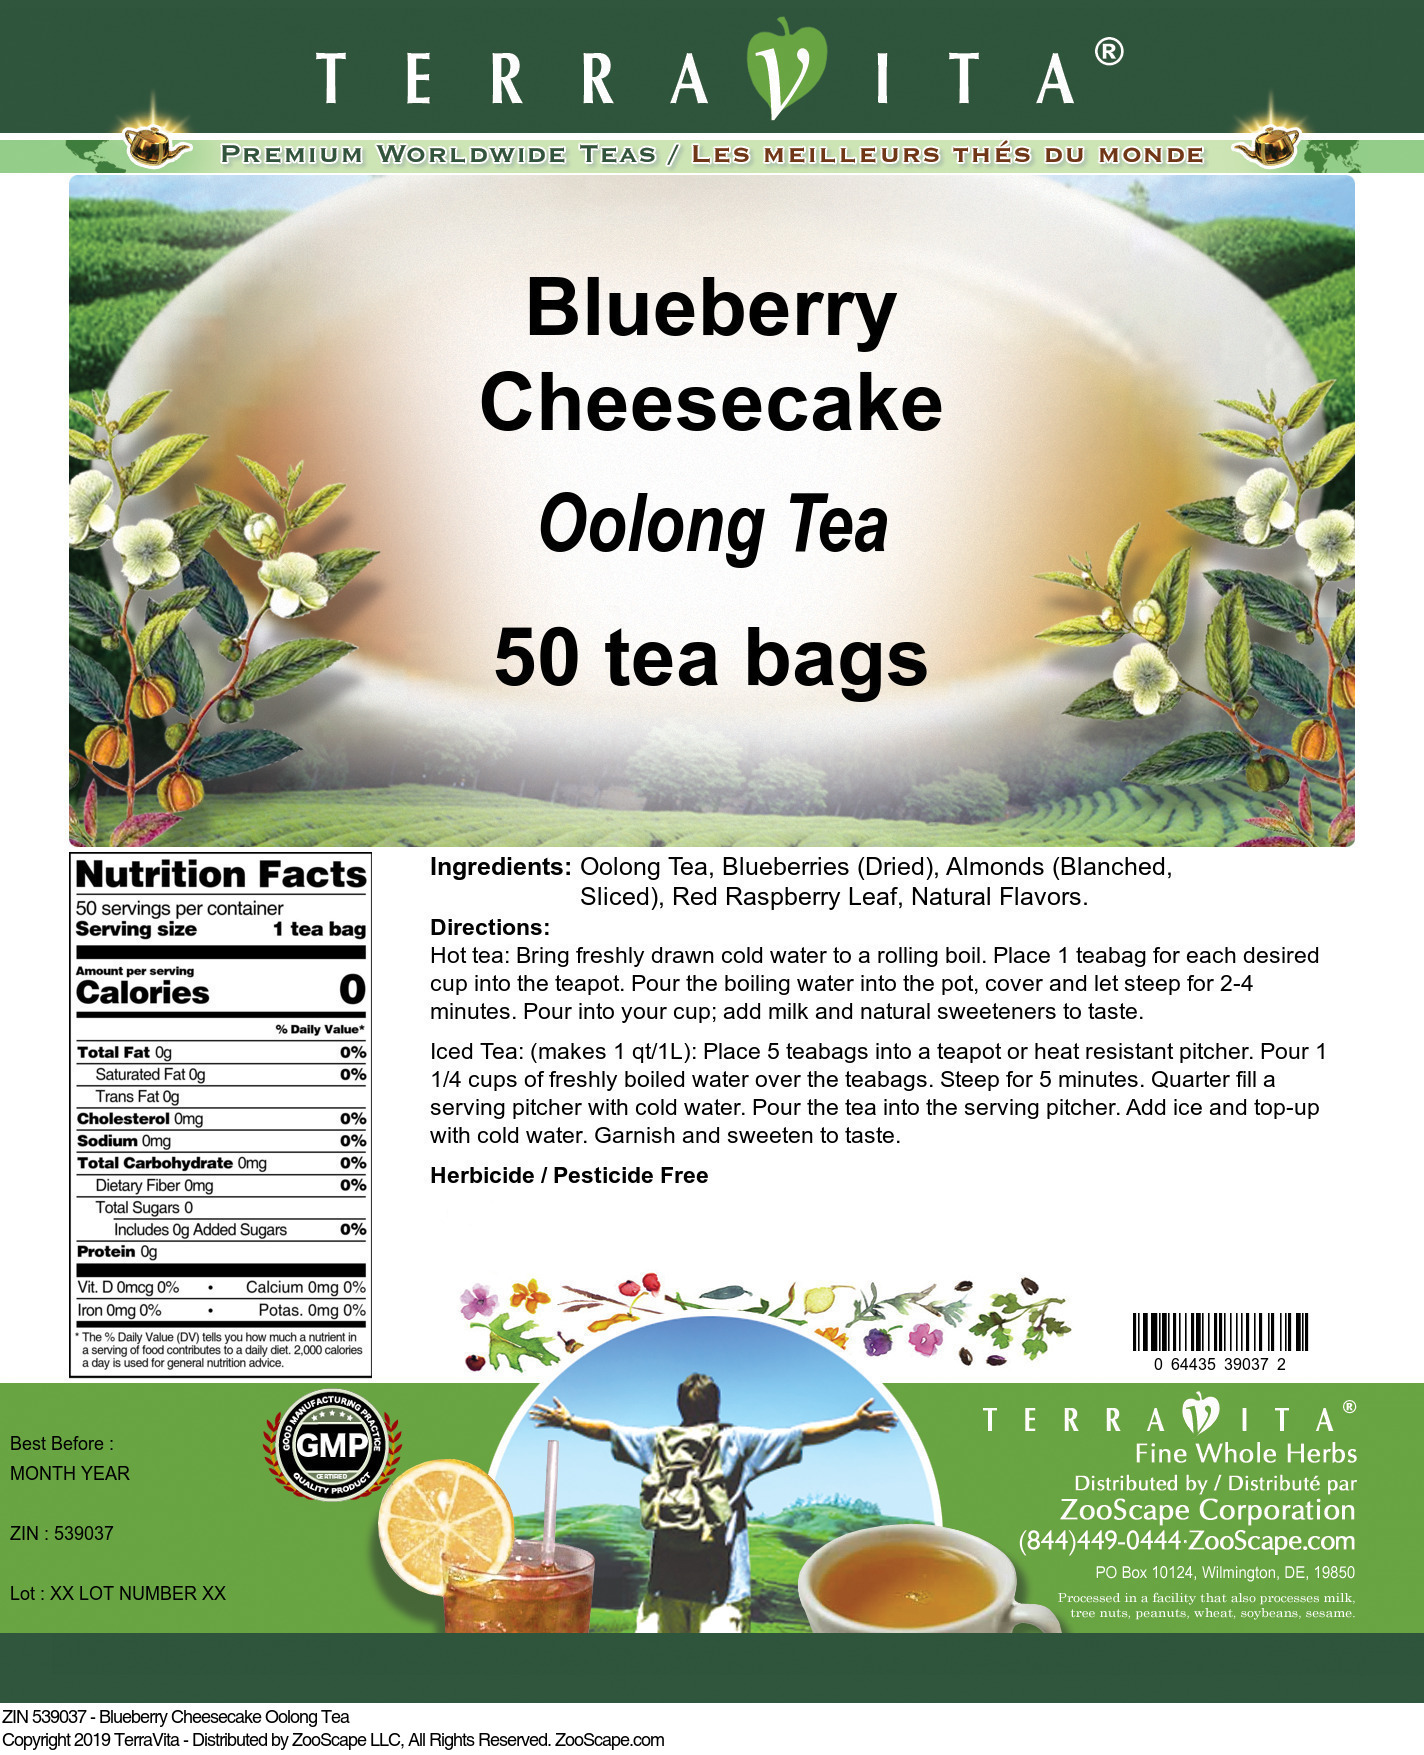 Blueberry Cheesecake Oolong Tea - Label